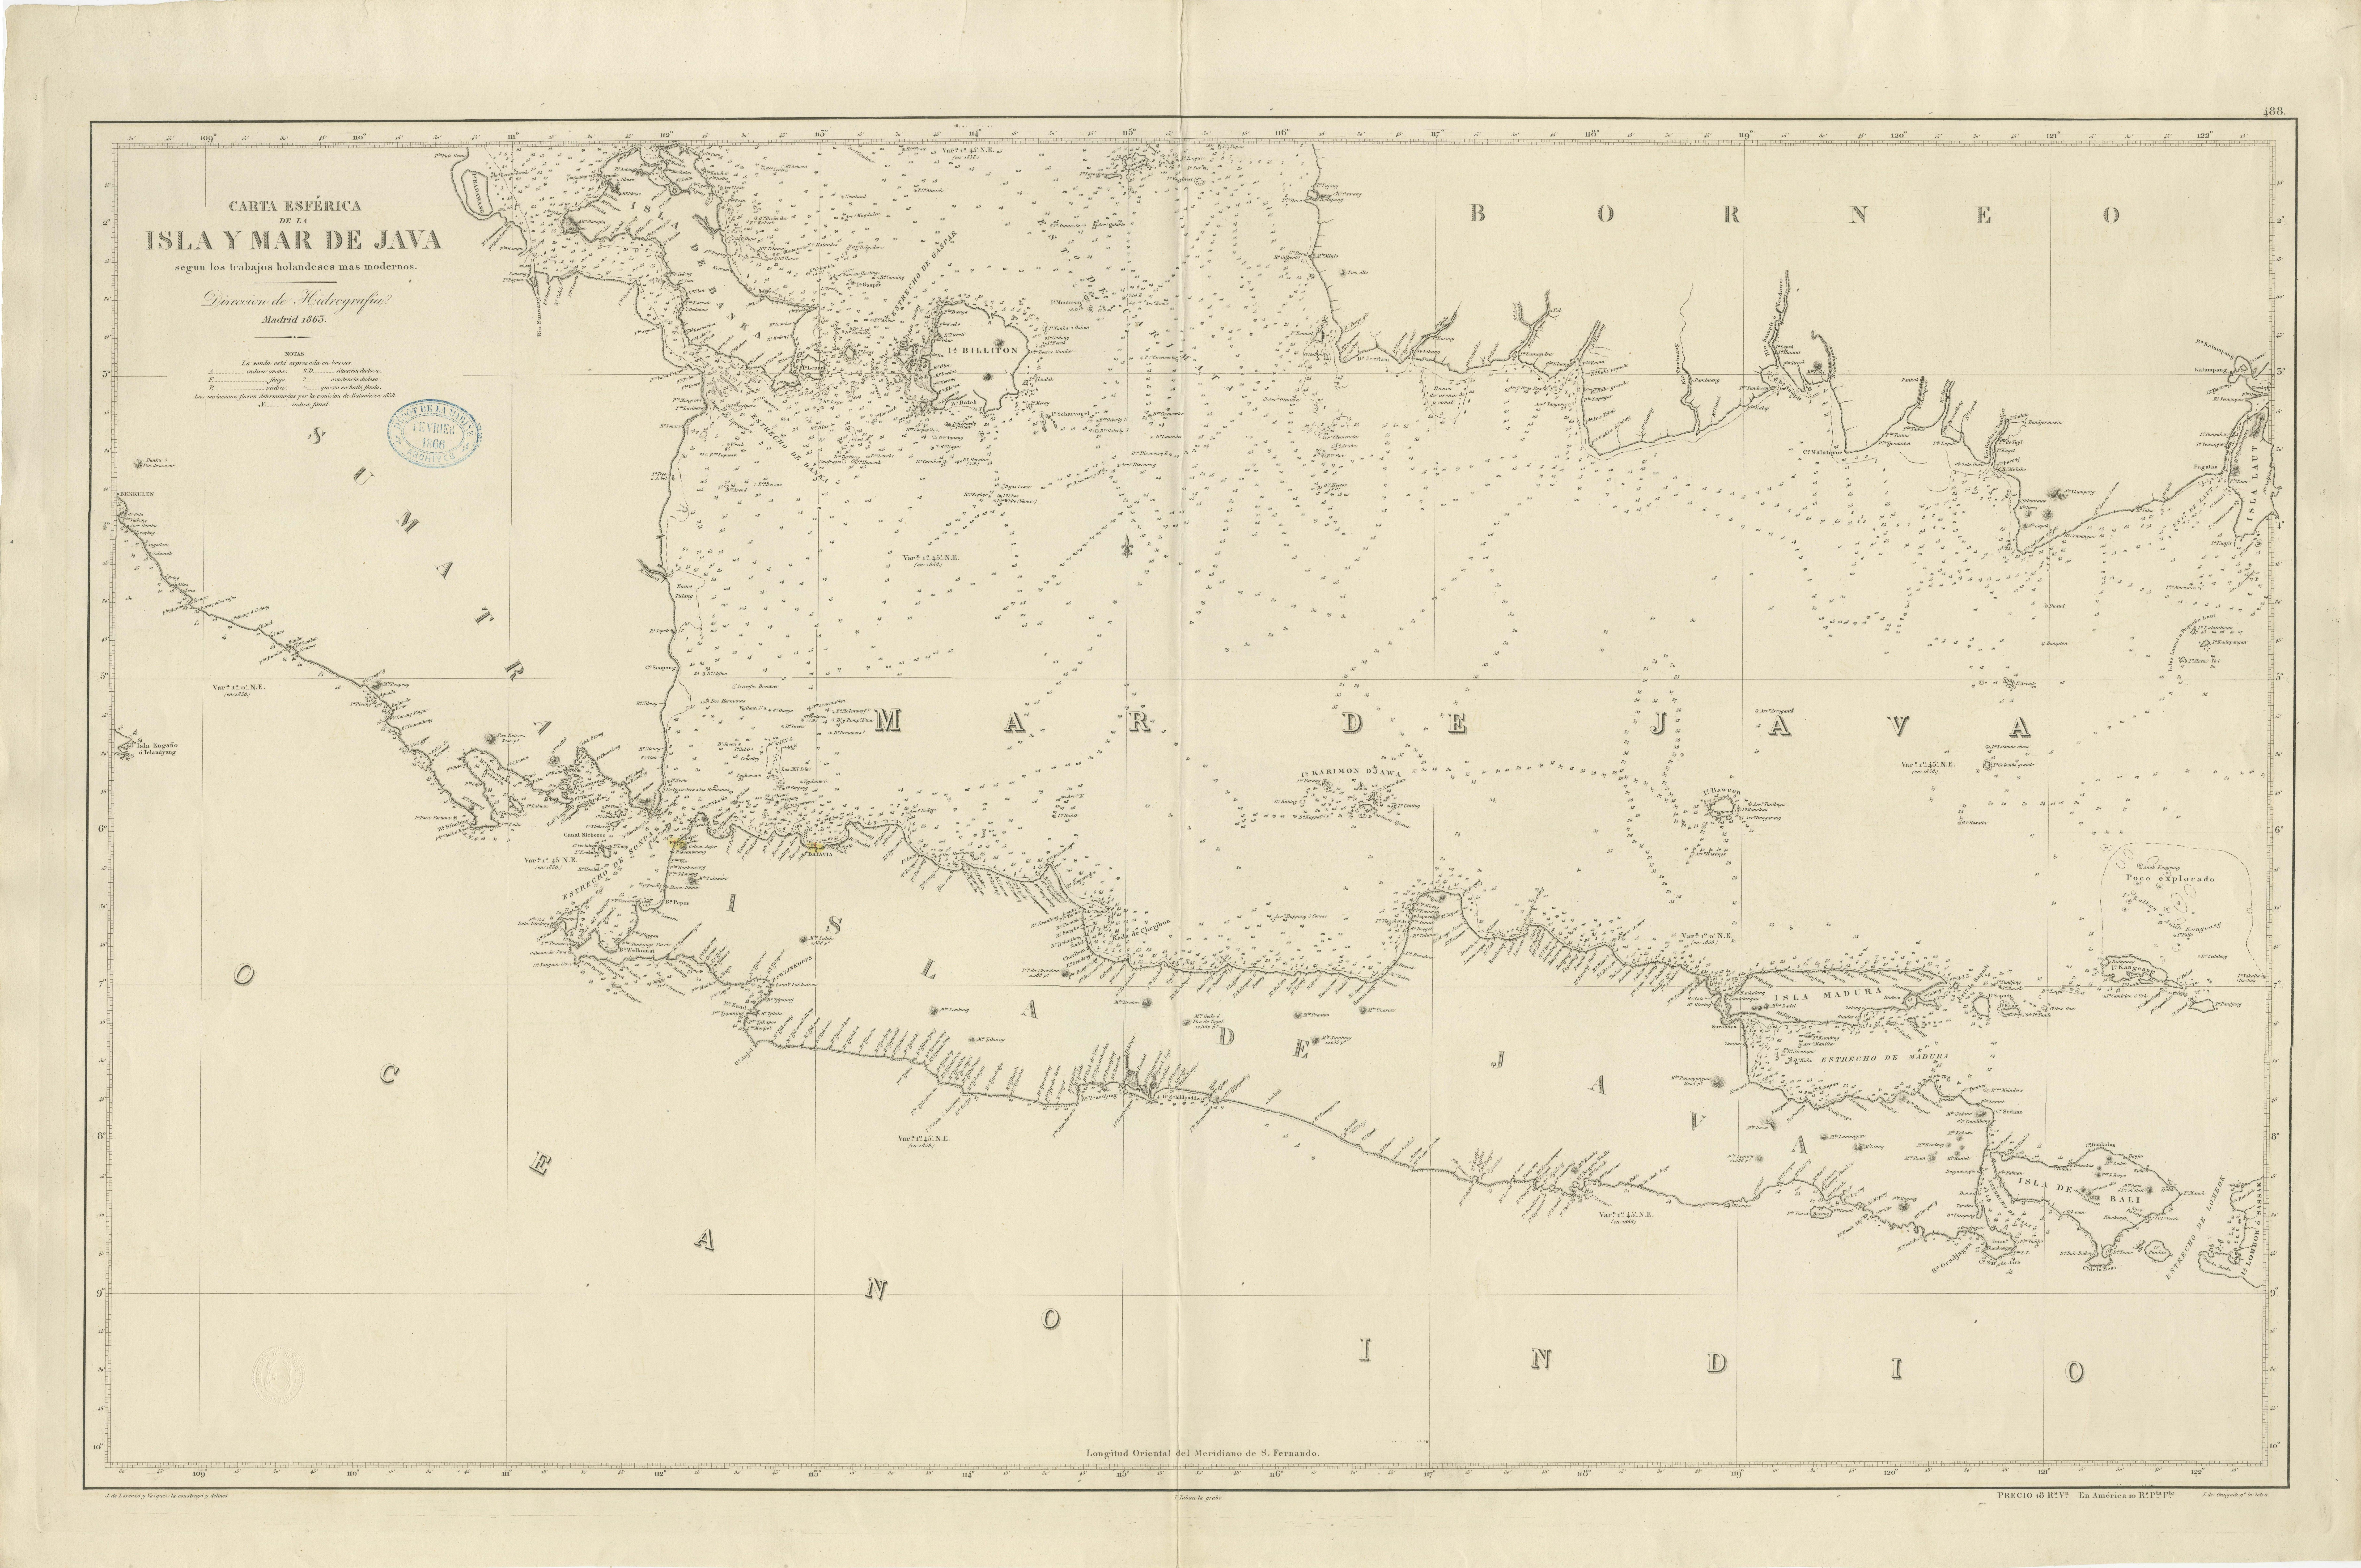 Antique map titled 'Carte Esférica de la Isla Y Mar de Java'. Large chart of the island and sea of Java, Indonesia. Beautiful nautical chart, published 1863 in Spain. 